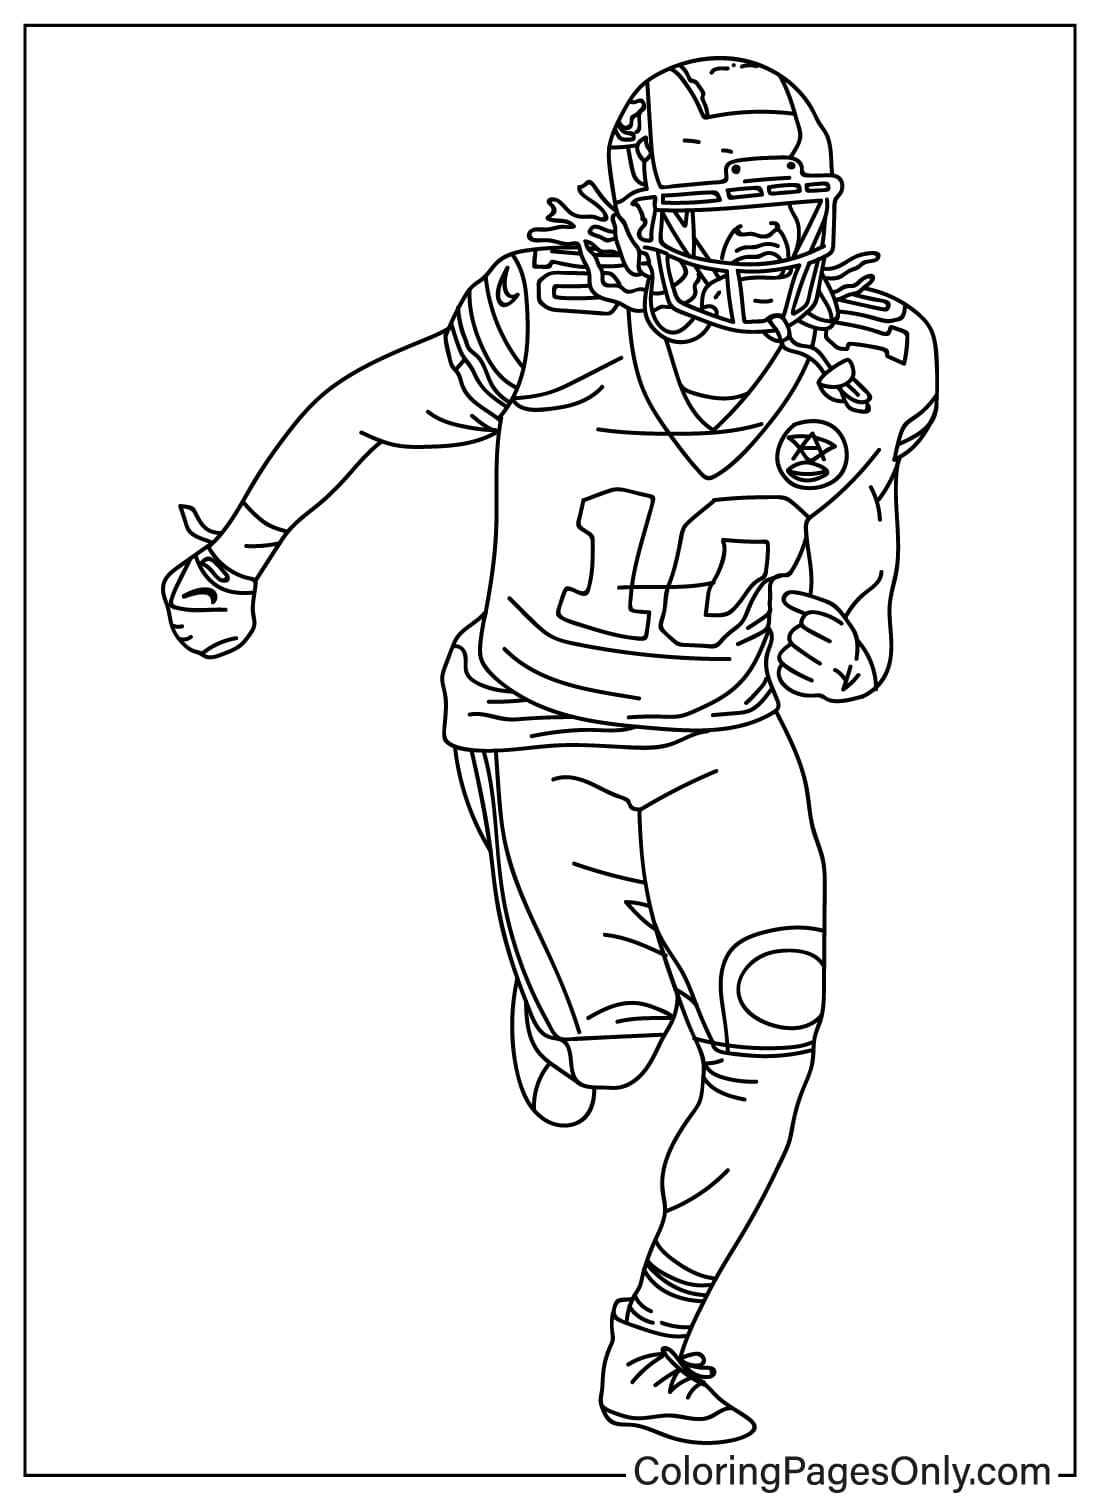 Isiah Pacheco Coloring Page Free Printable Coloring Pages